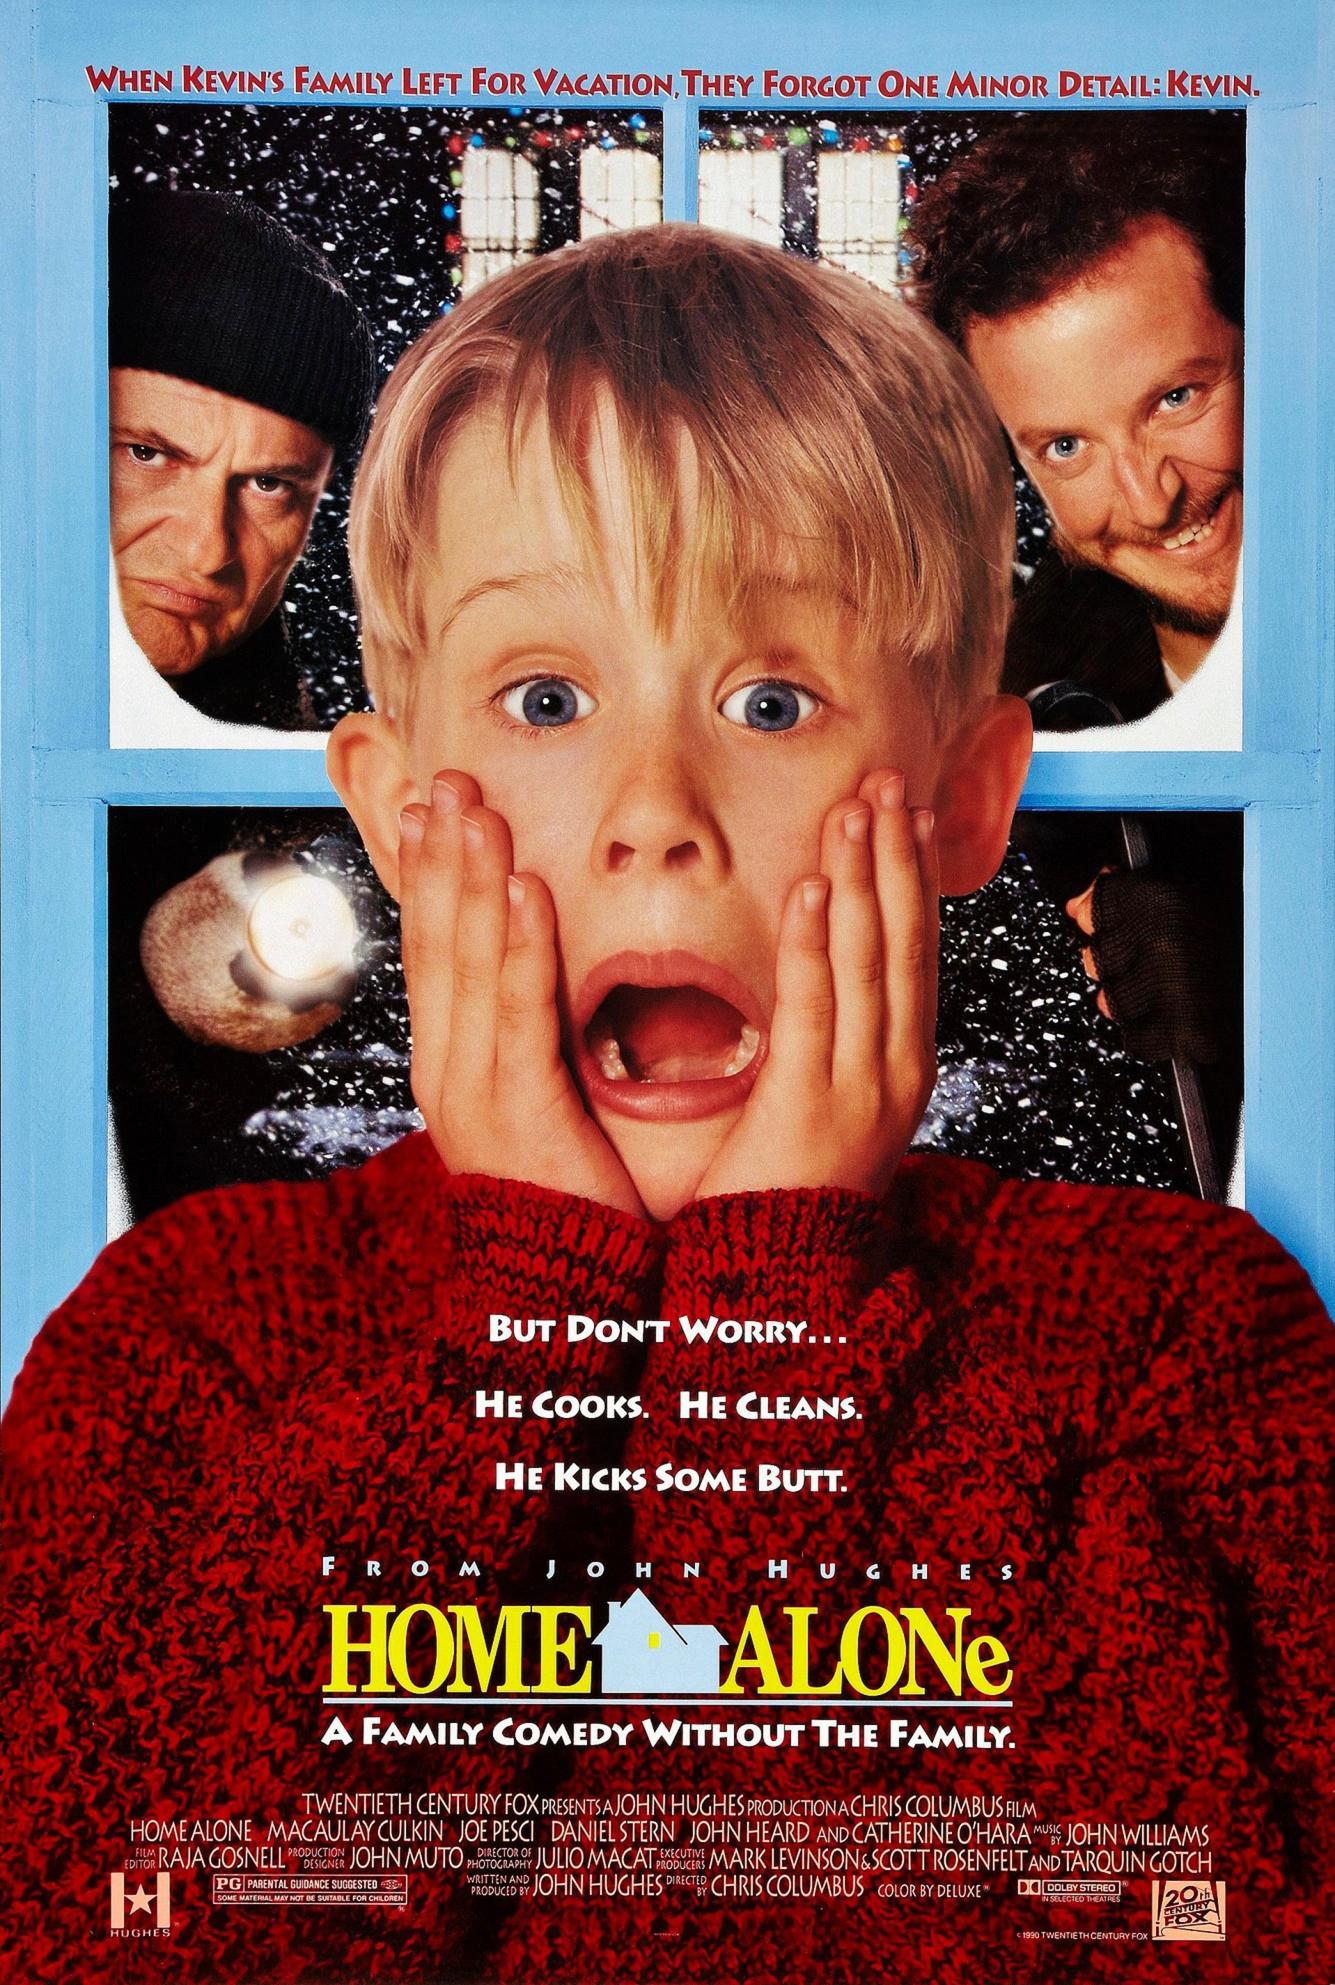 What’s Your Favorite Holiday Movie?